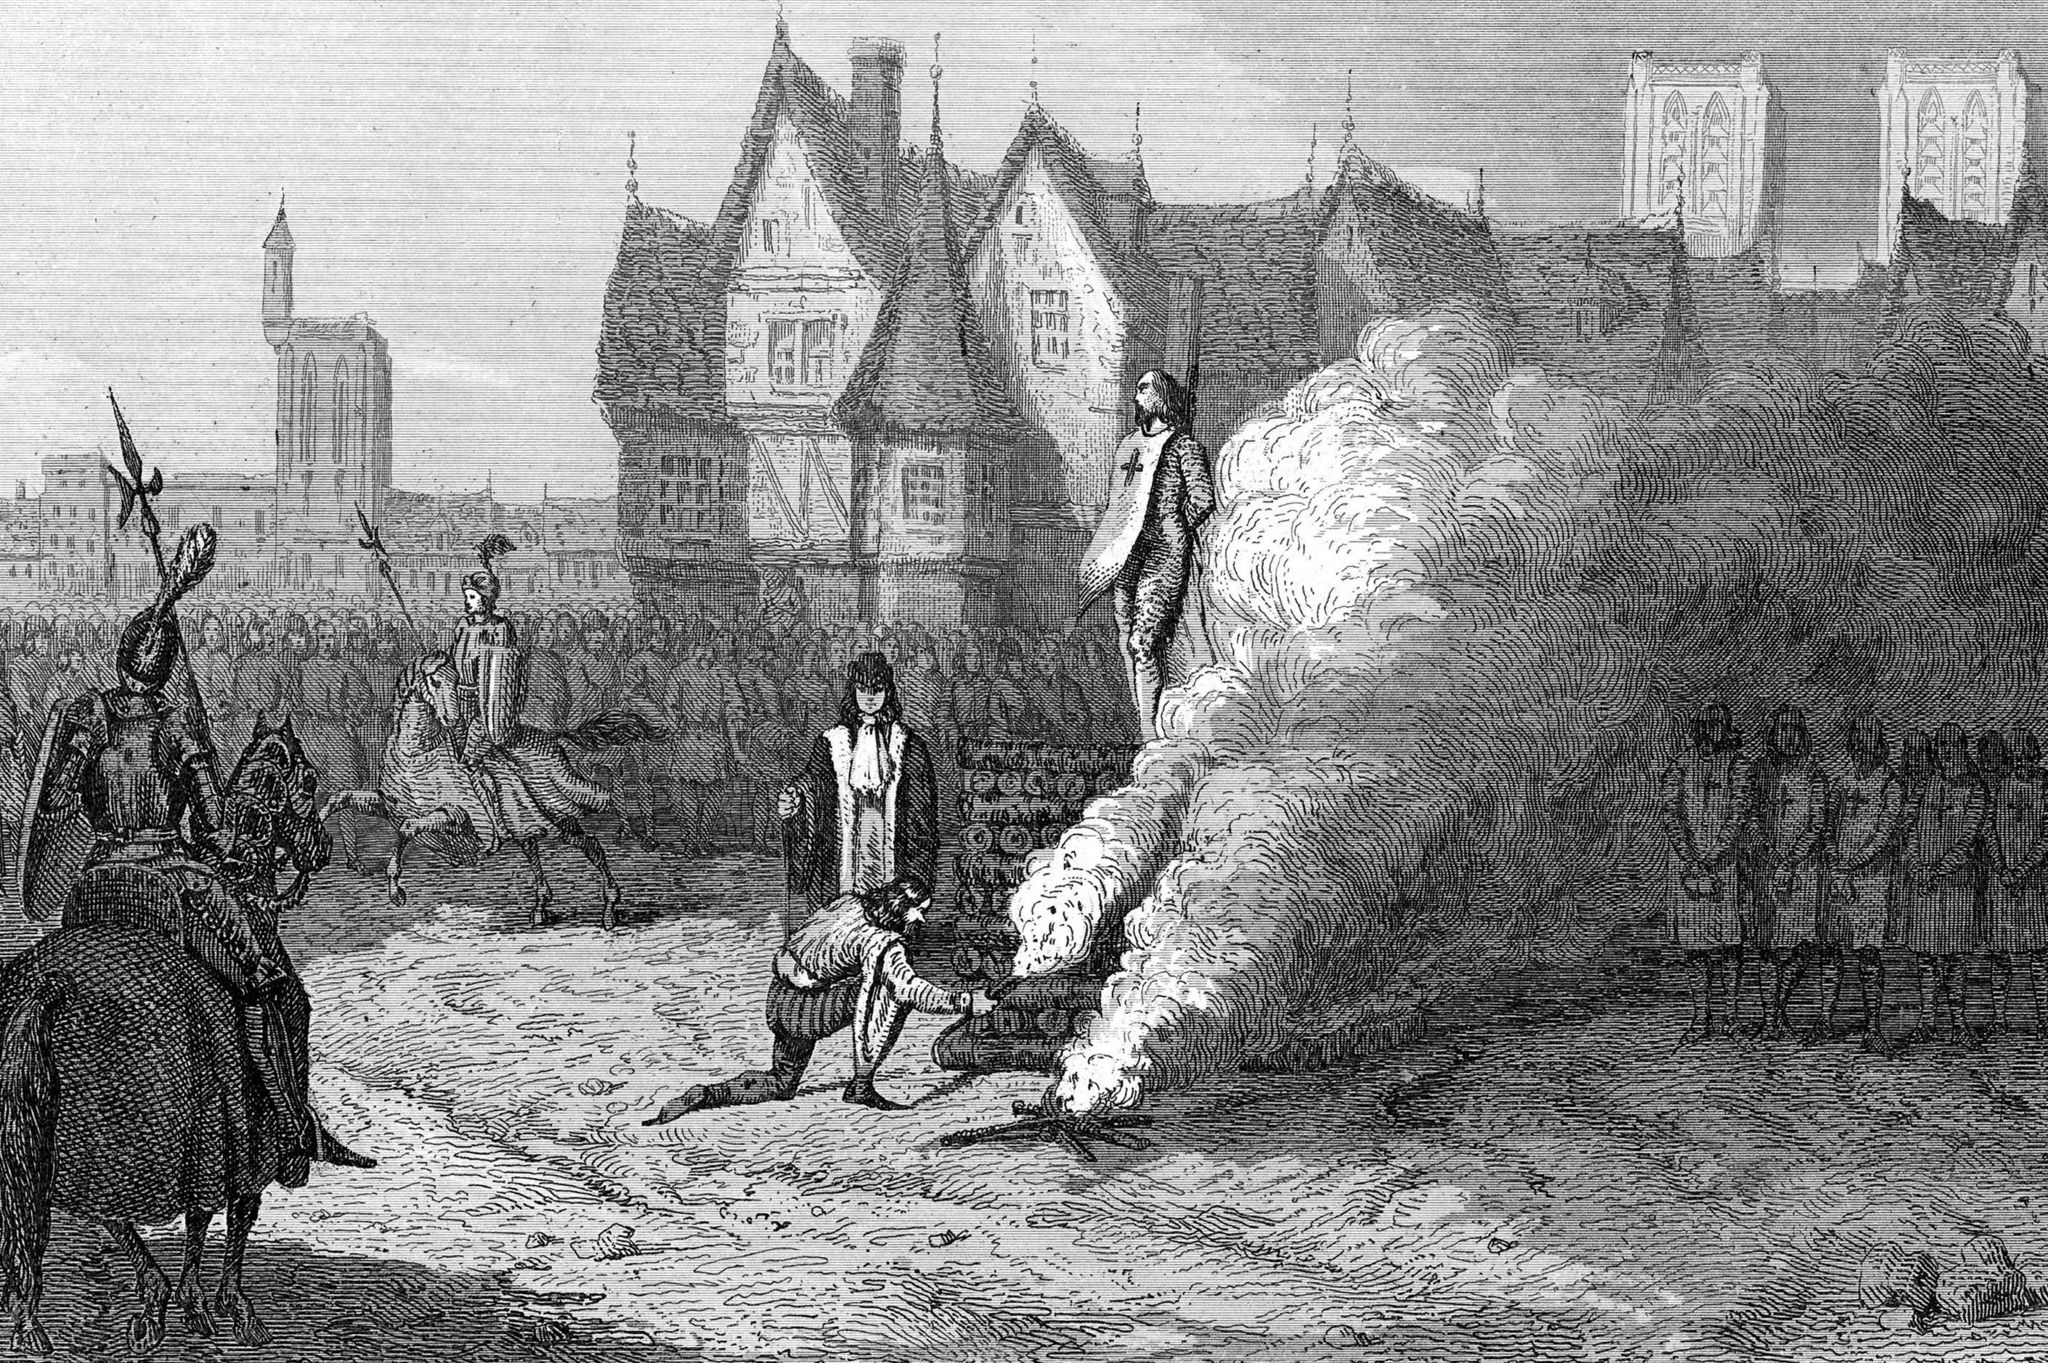 An etching showing the last grandmaster of the Templars, Jacques de Molay, being burned to death in Paris in 1314